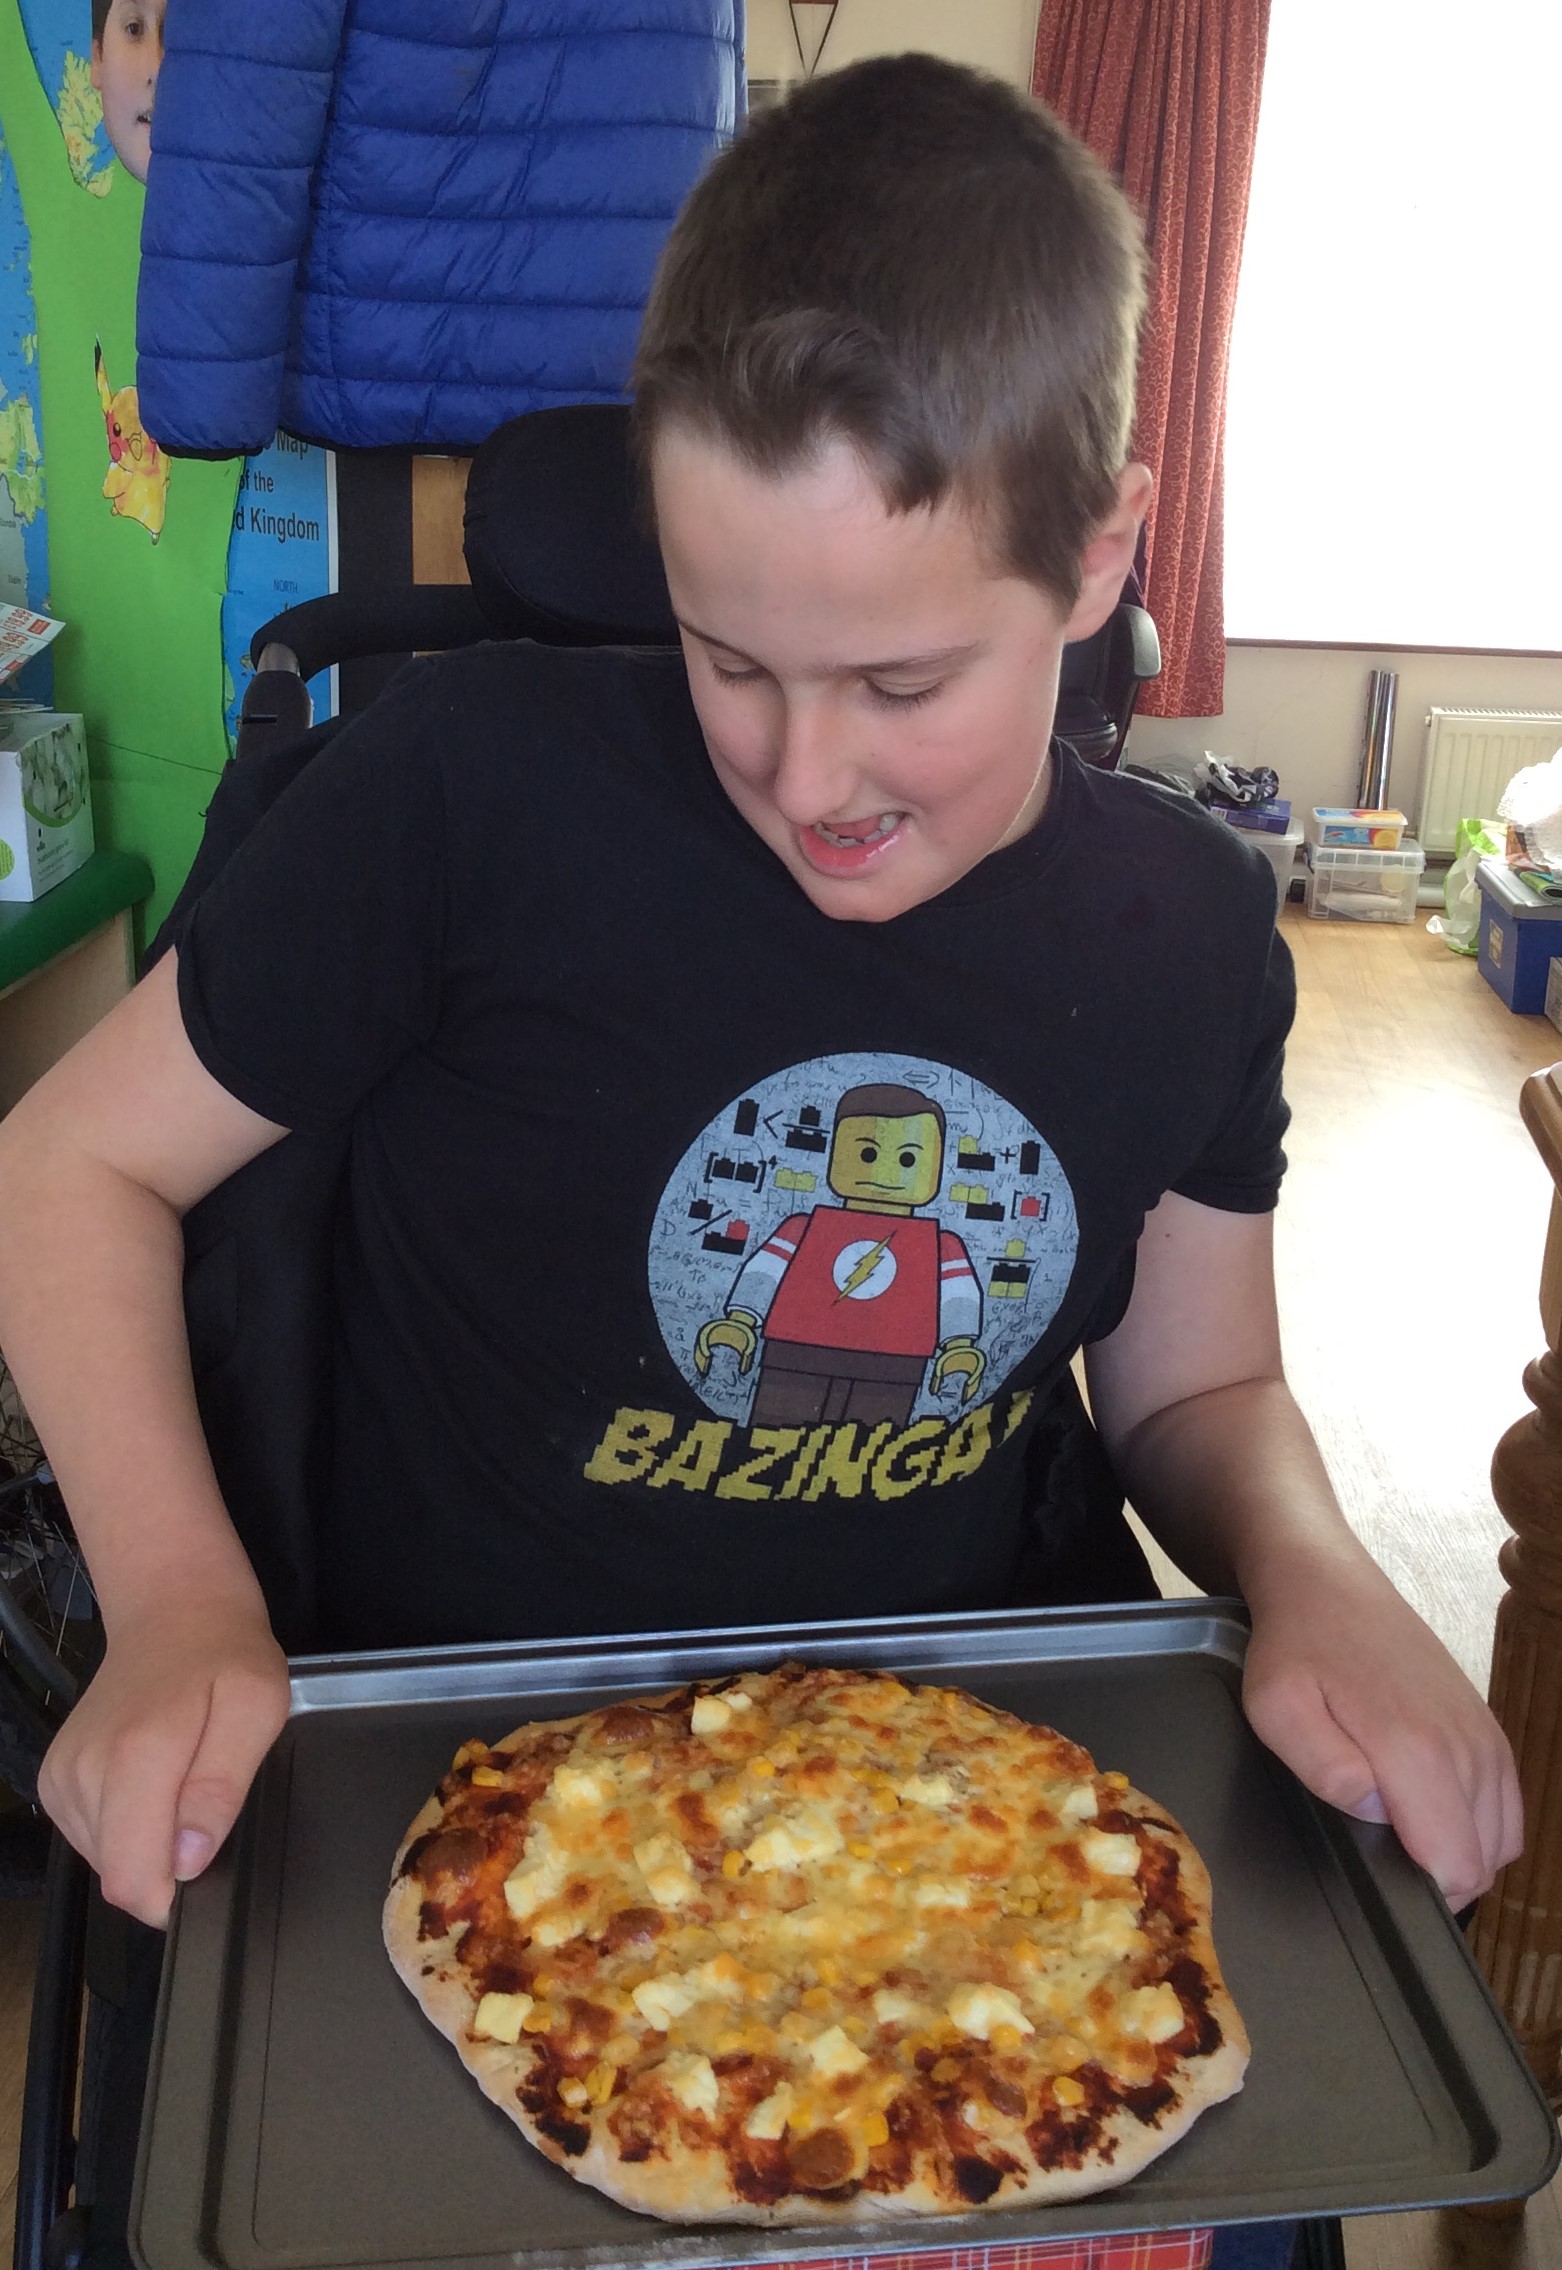 A boy using a wheelchair is smiling and looking down at his home made pizza. He is wearing a black Tshirt with a Lego Sheldon character on it and the word "Bazinga!"